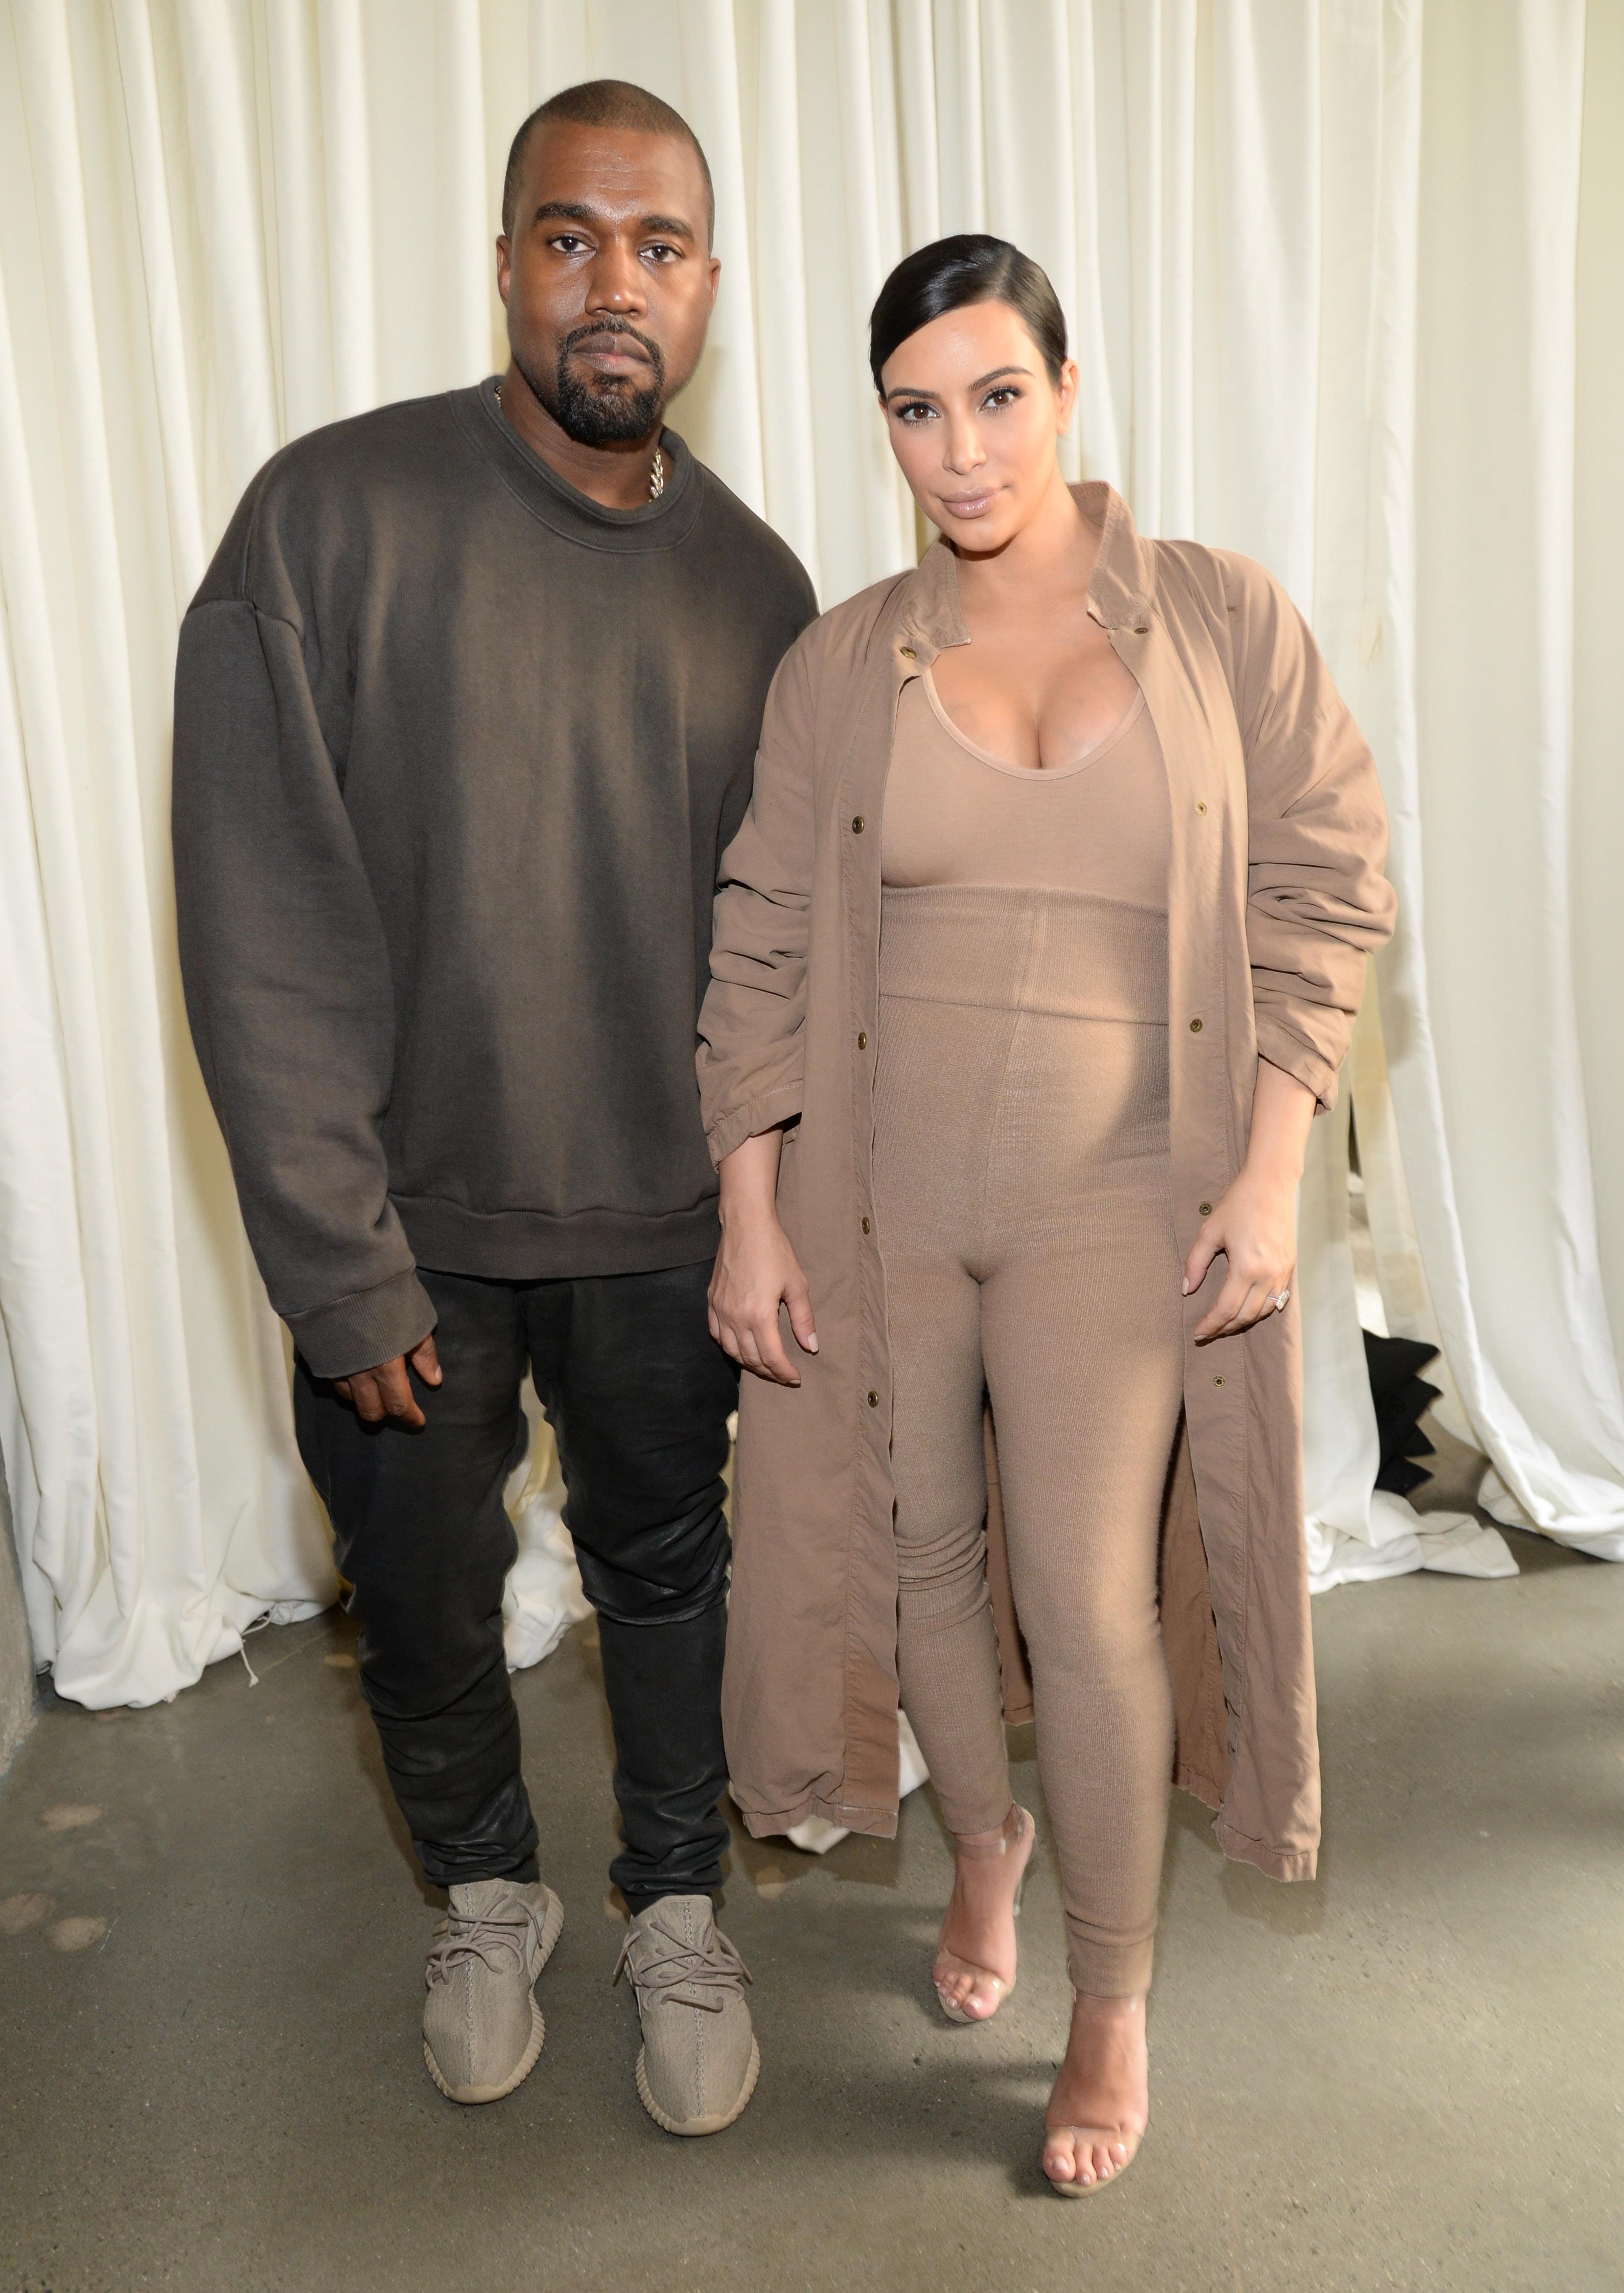 Kim Kardashian & Kanye West Reveal The Gender of Their Expected Child